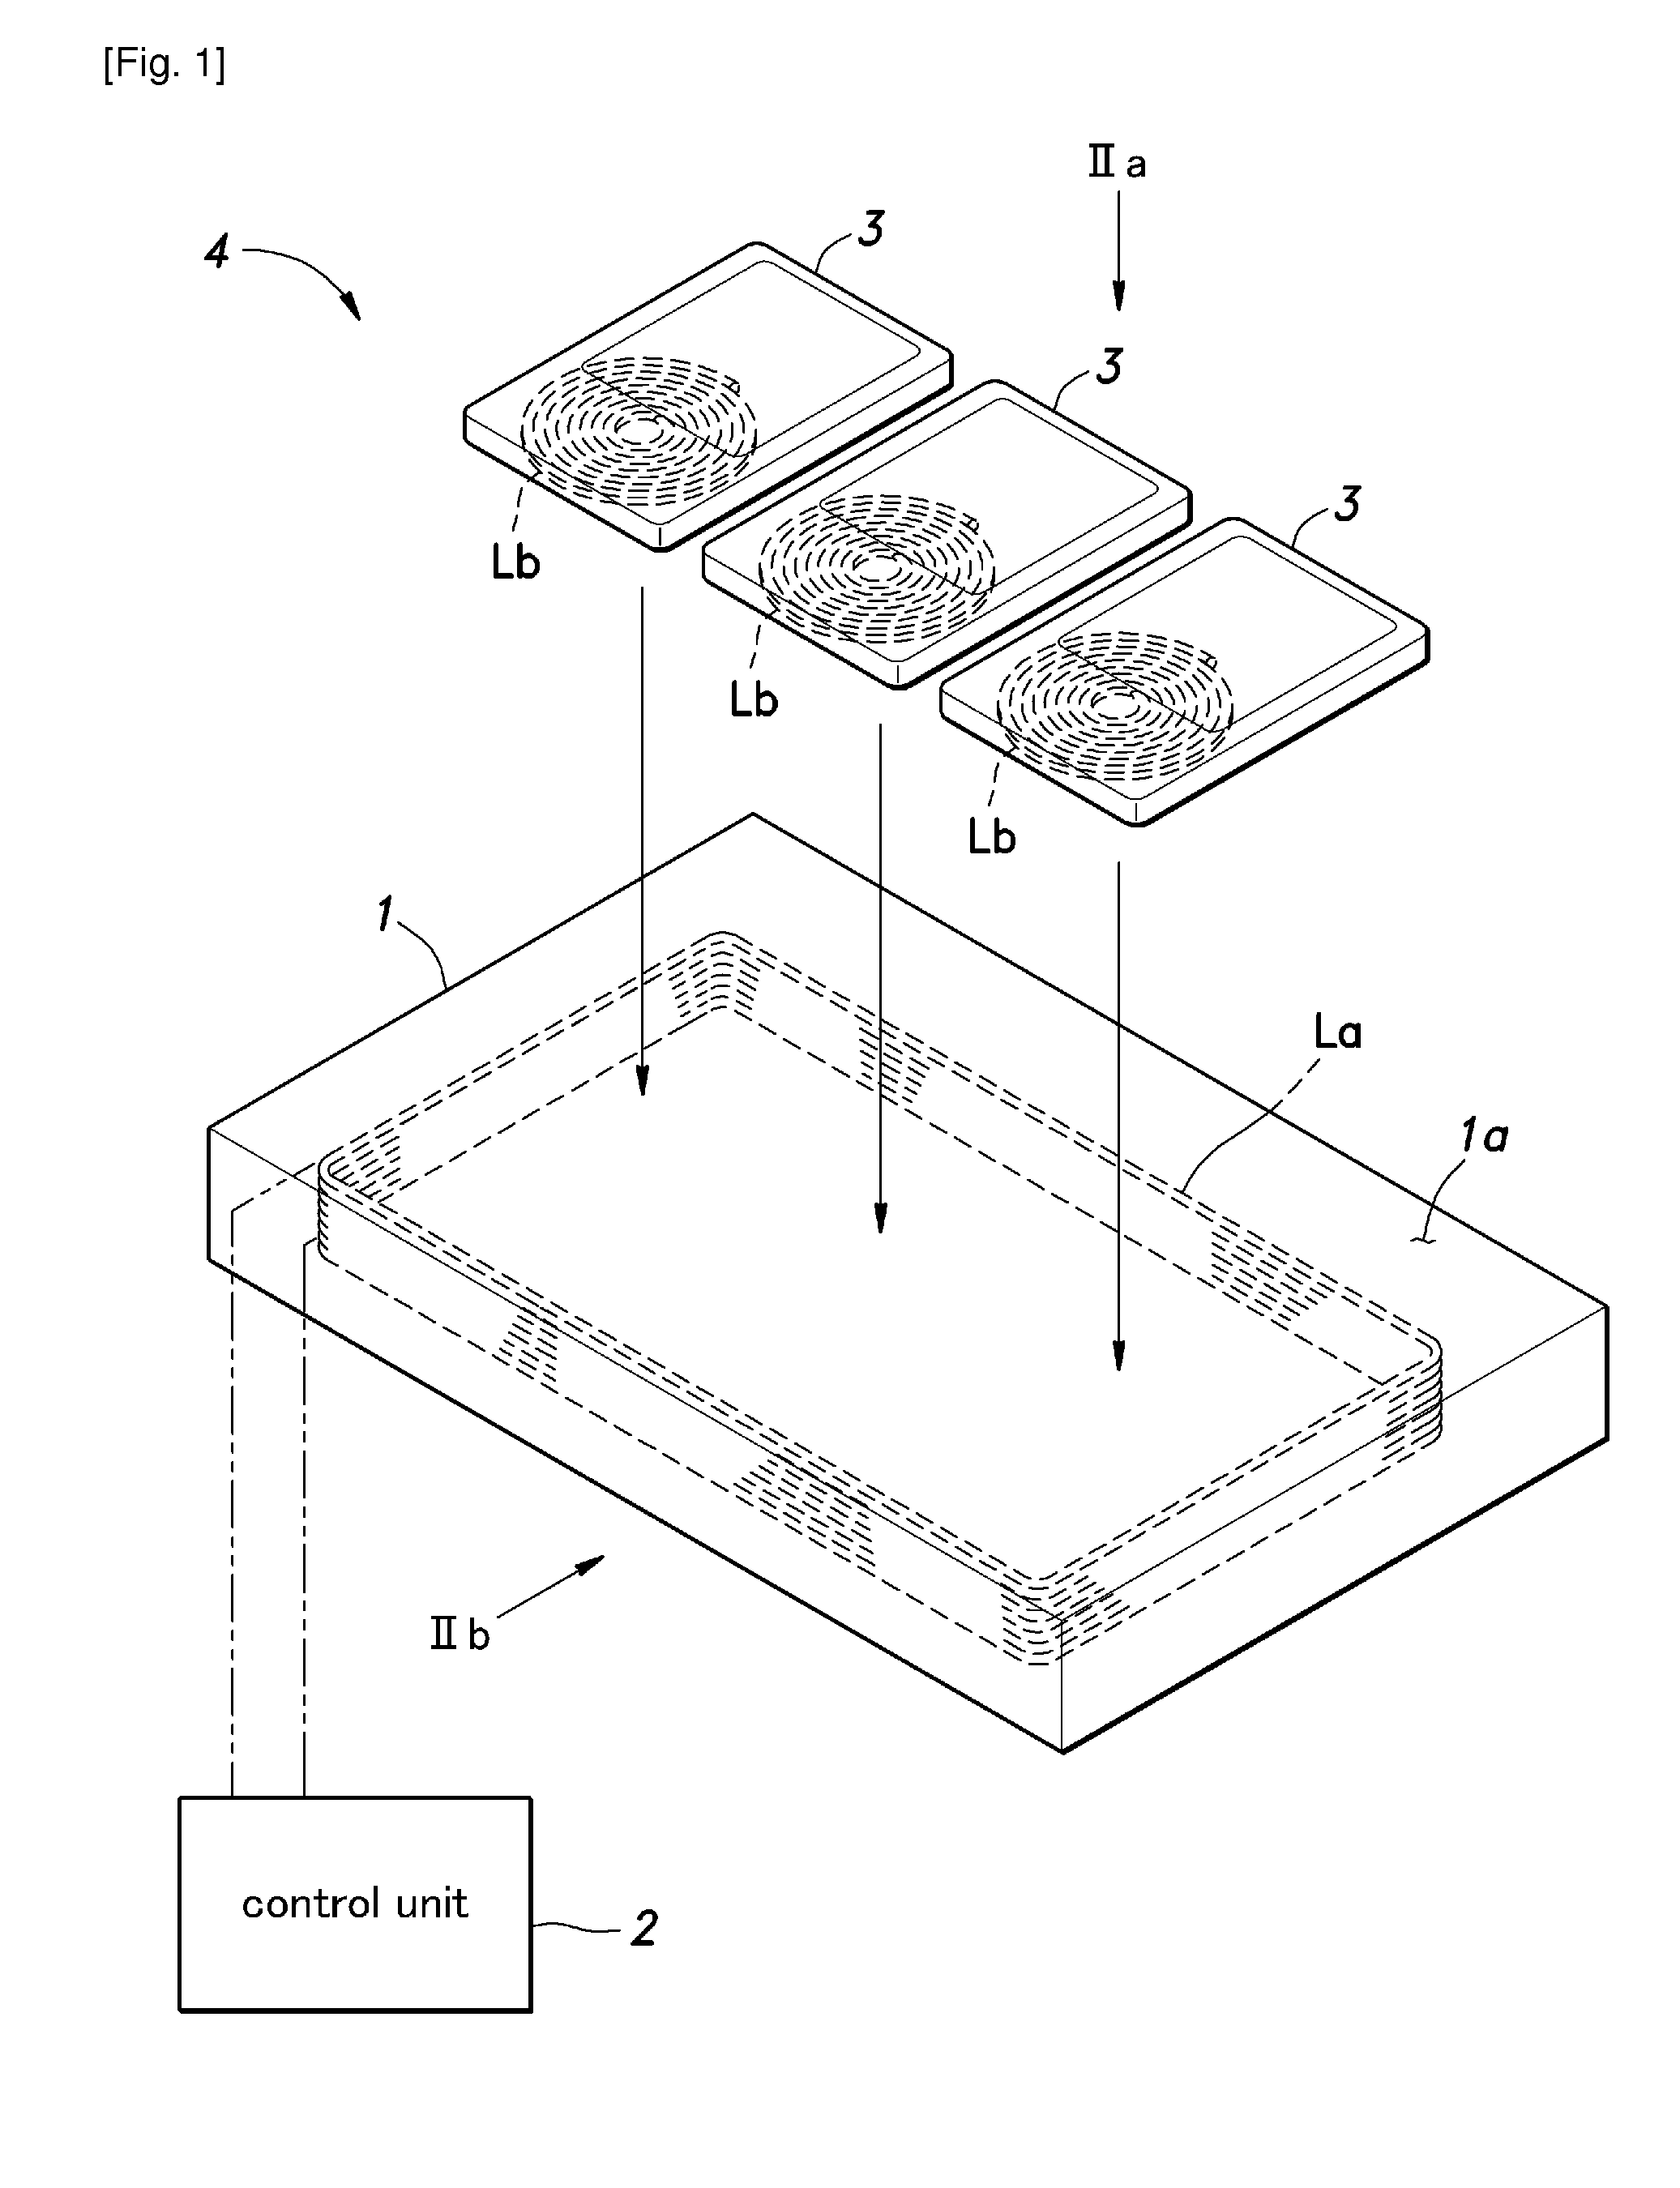 Contactless electric power feeding system